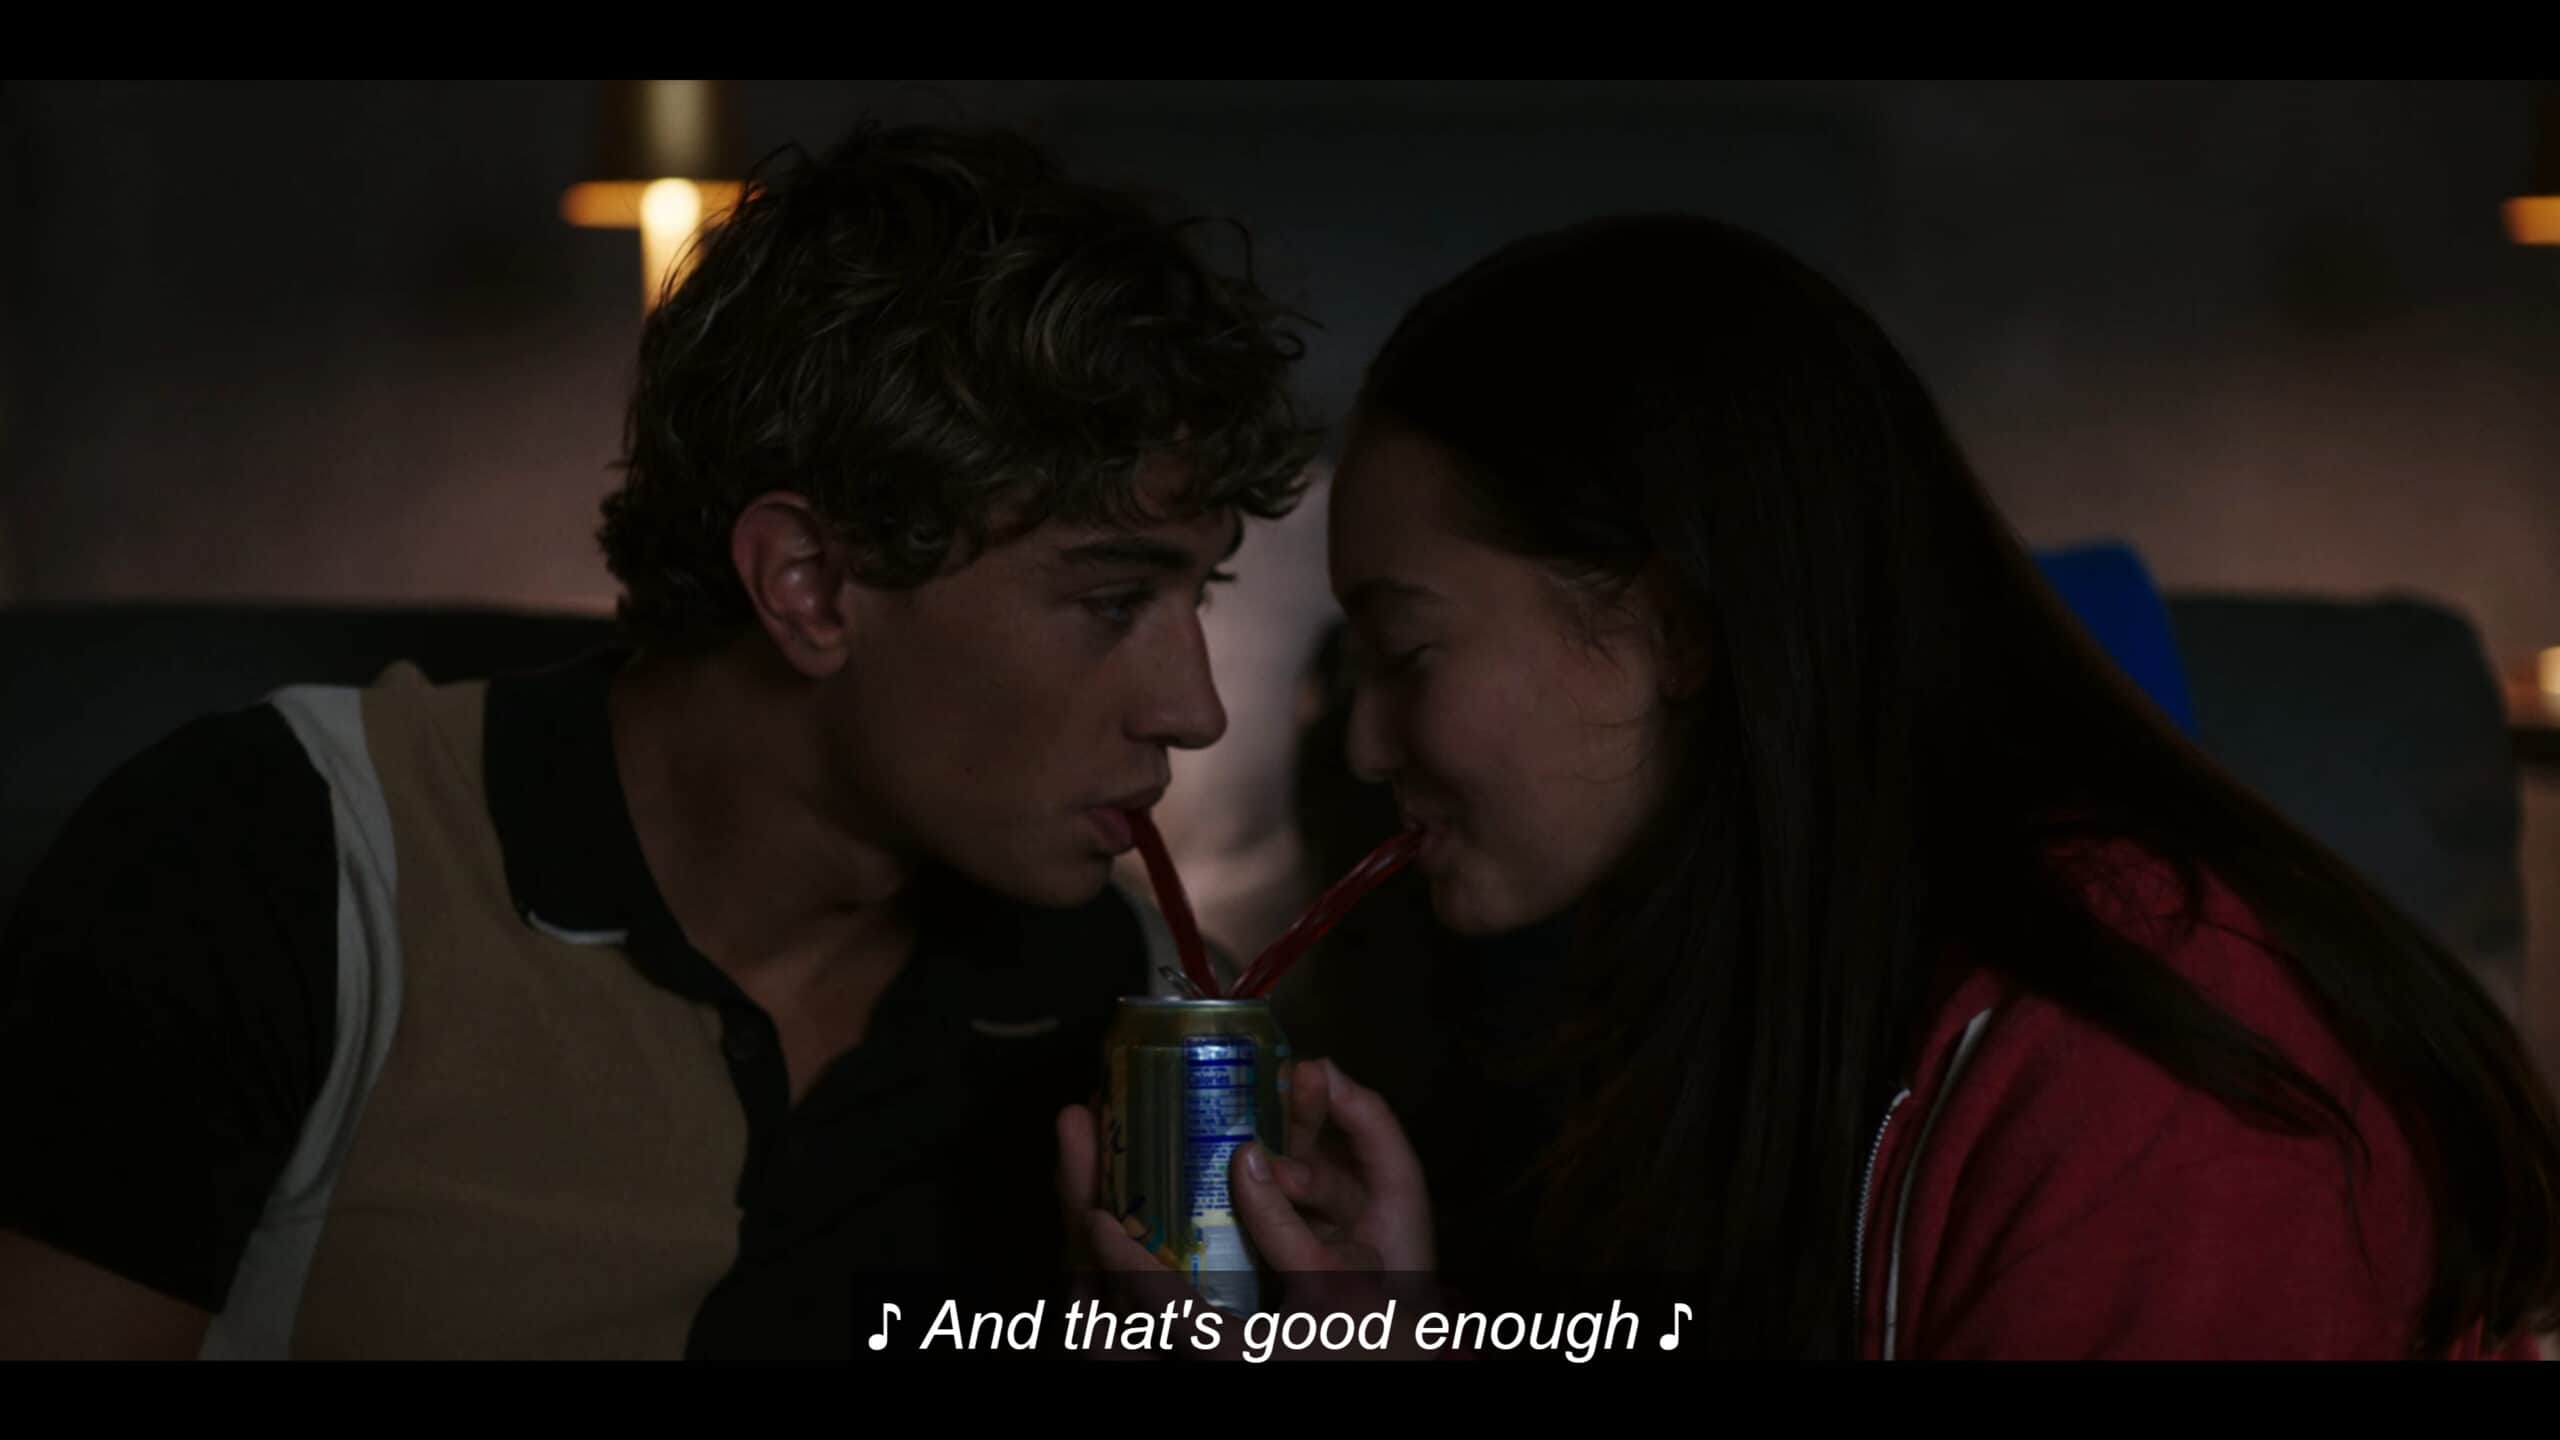 Jeremiah (Gavin Casalegno) and Belly (Lola Tung) sharing a drink, with him looking at her and her down at the drink